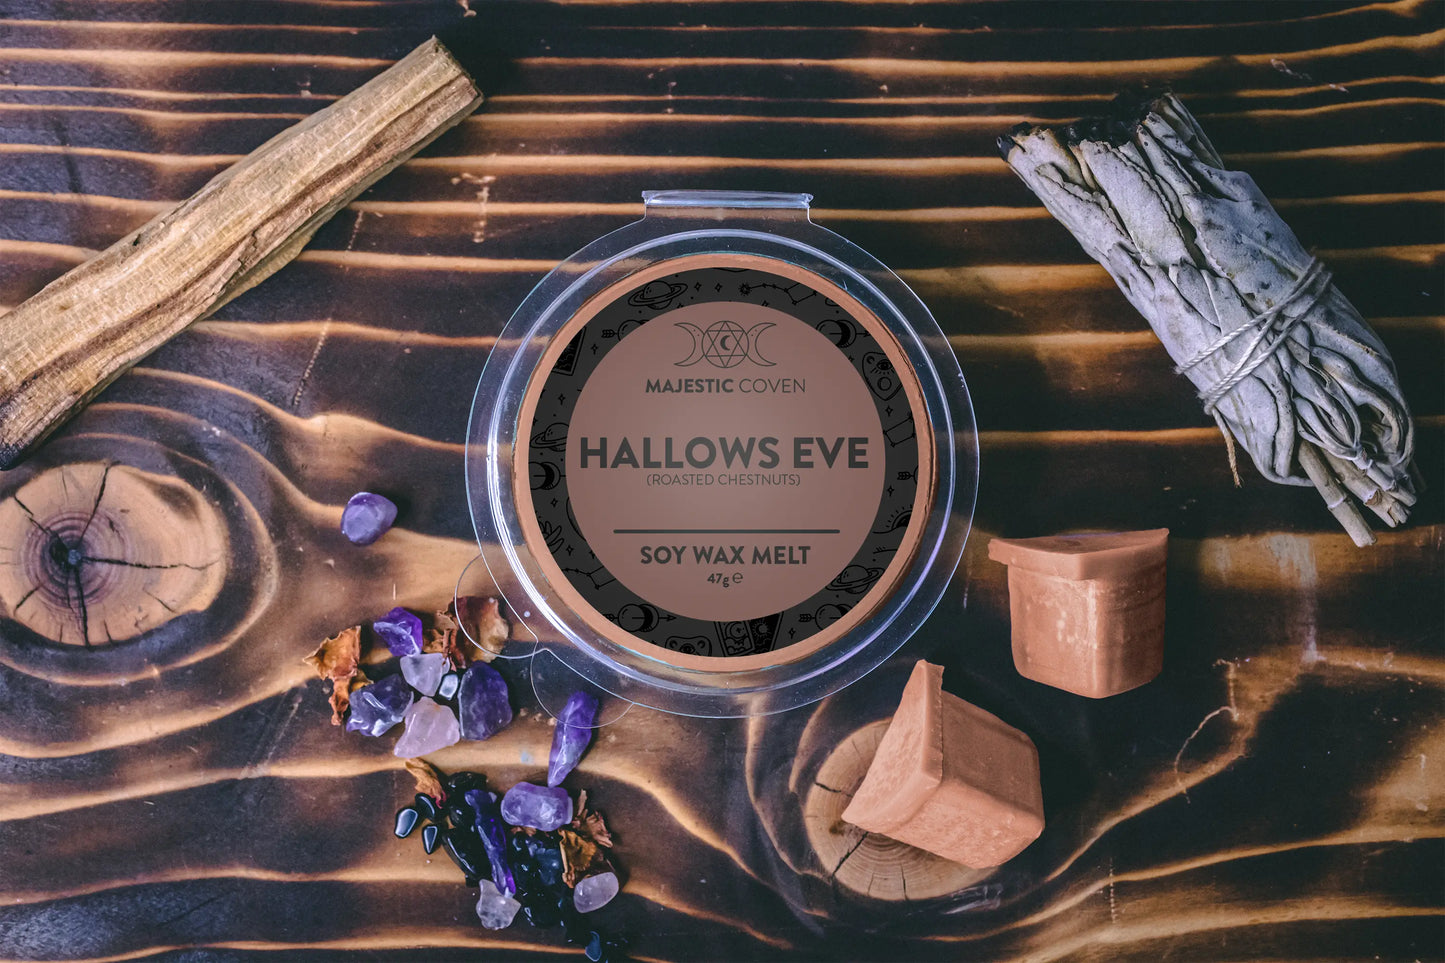 Hallows Eve - Roasted Chestnuts - Soy Wax Melt - Spellbound